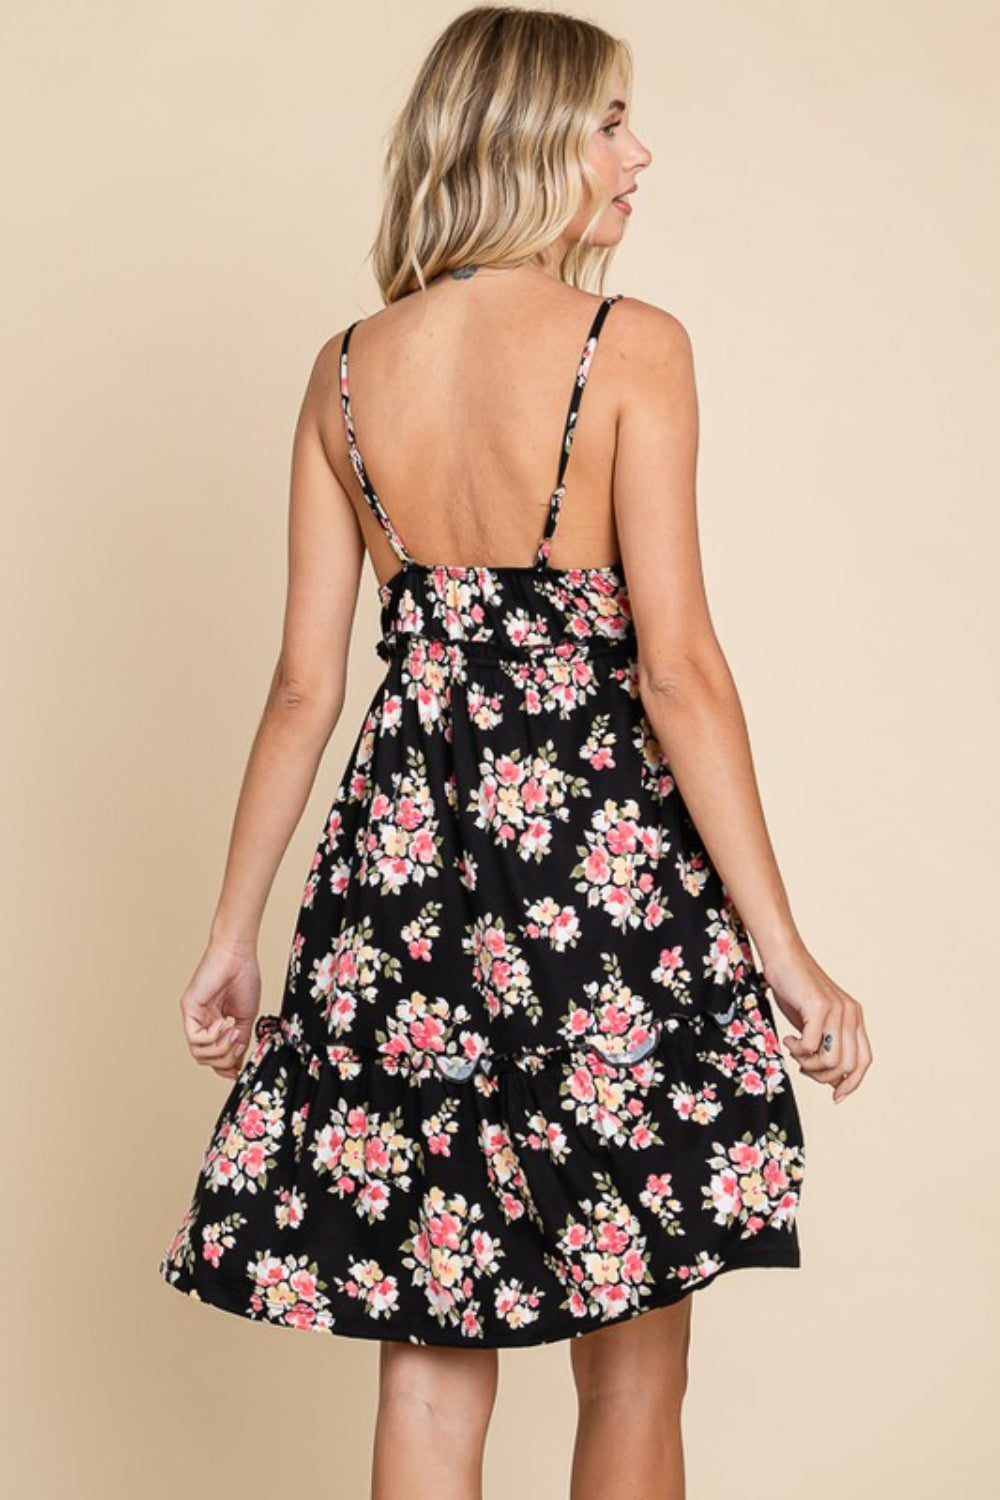 Summer Soiree Staple: Floral Frill Cami Dress - Perfect for Beach Weddings & Parties!